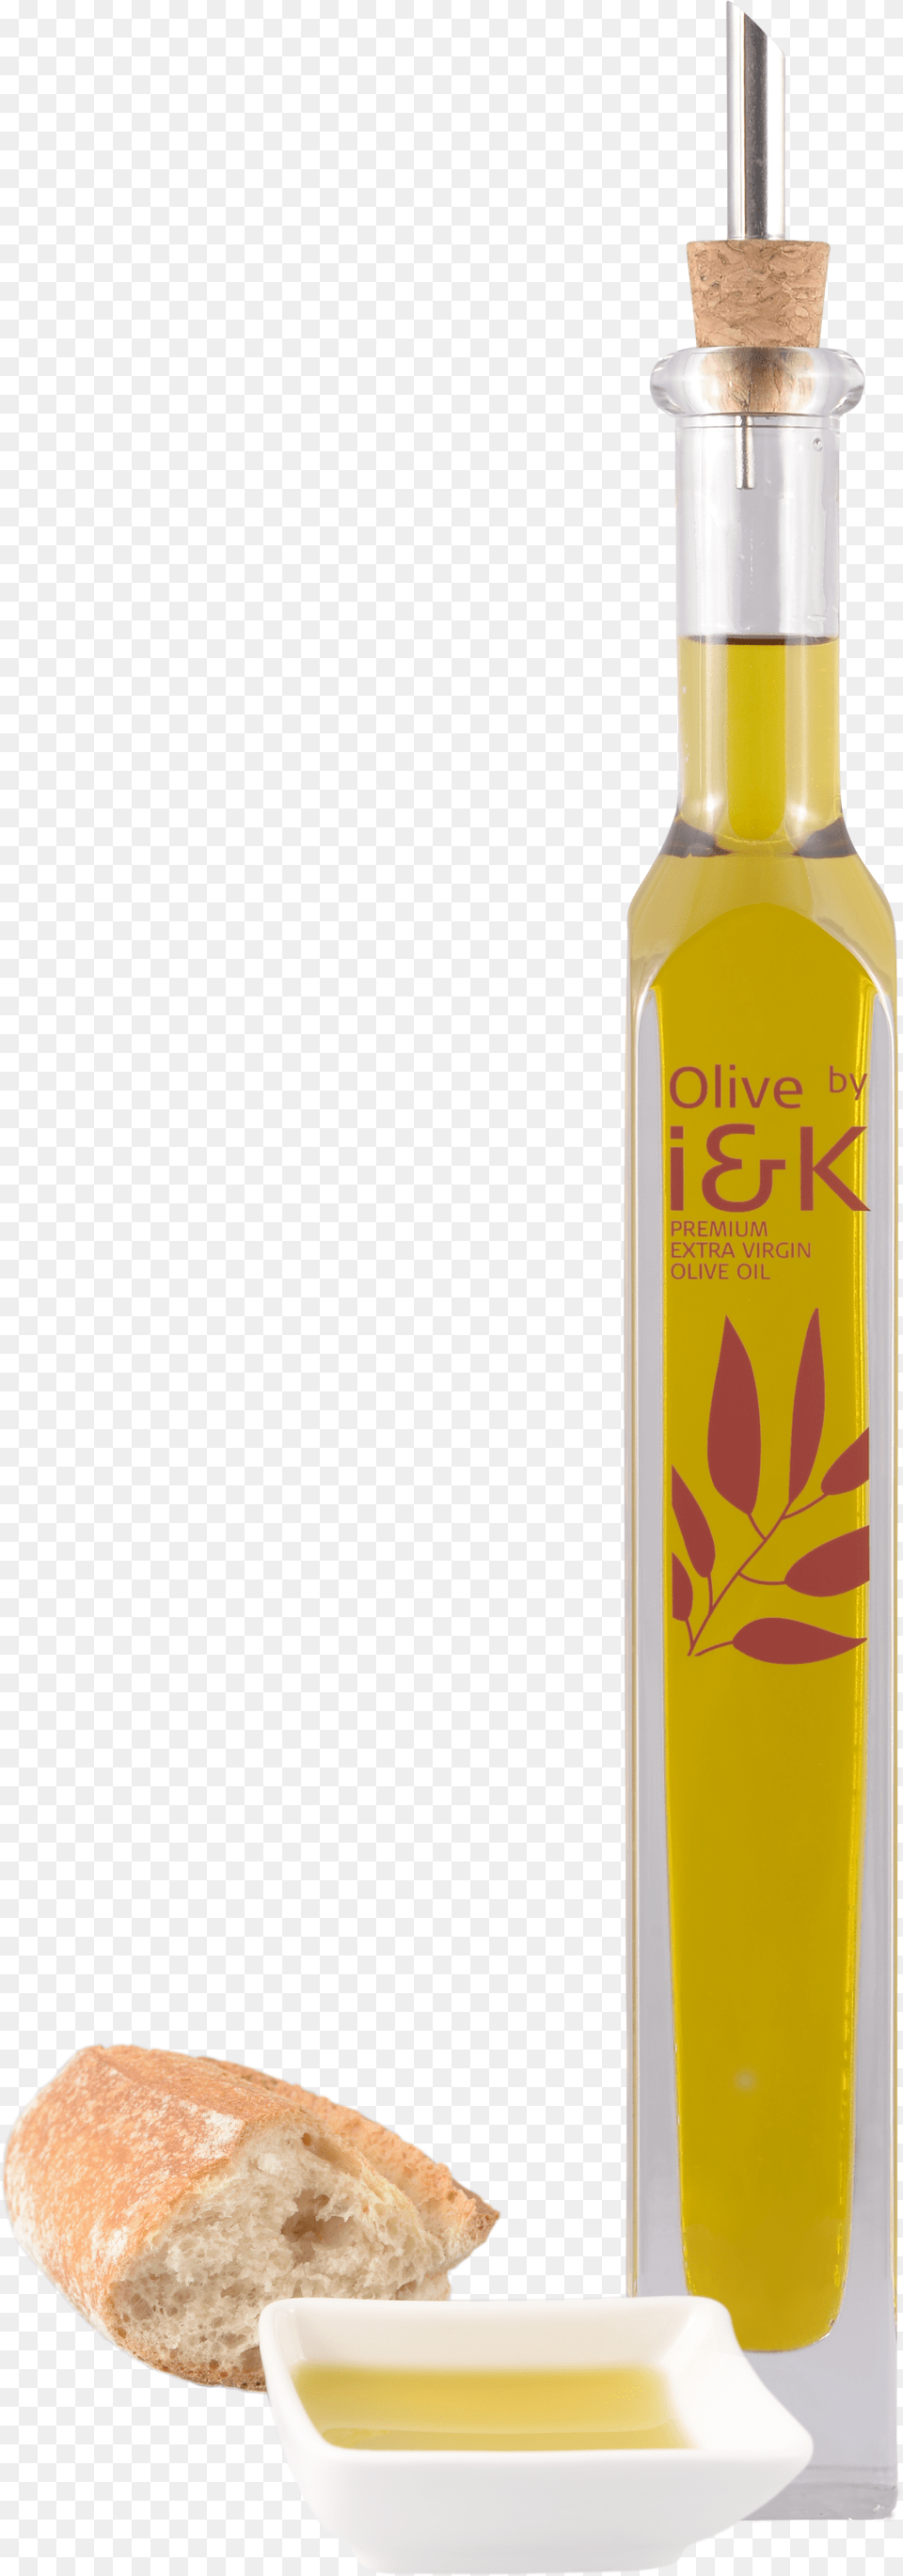 Olive By Iu0026k Press, Bread, Food, Cooking Oil Free Transparent Png